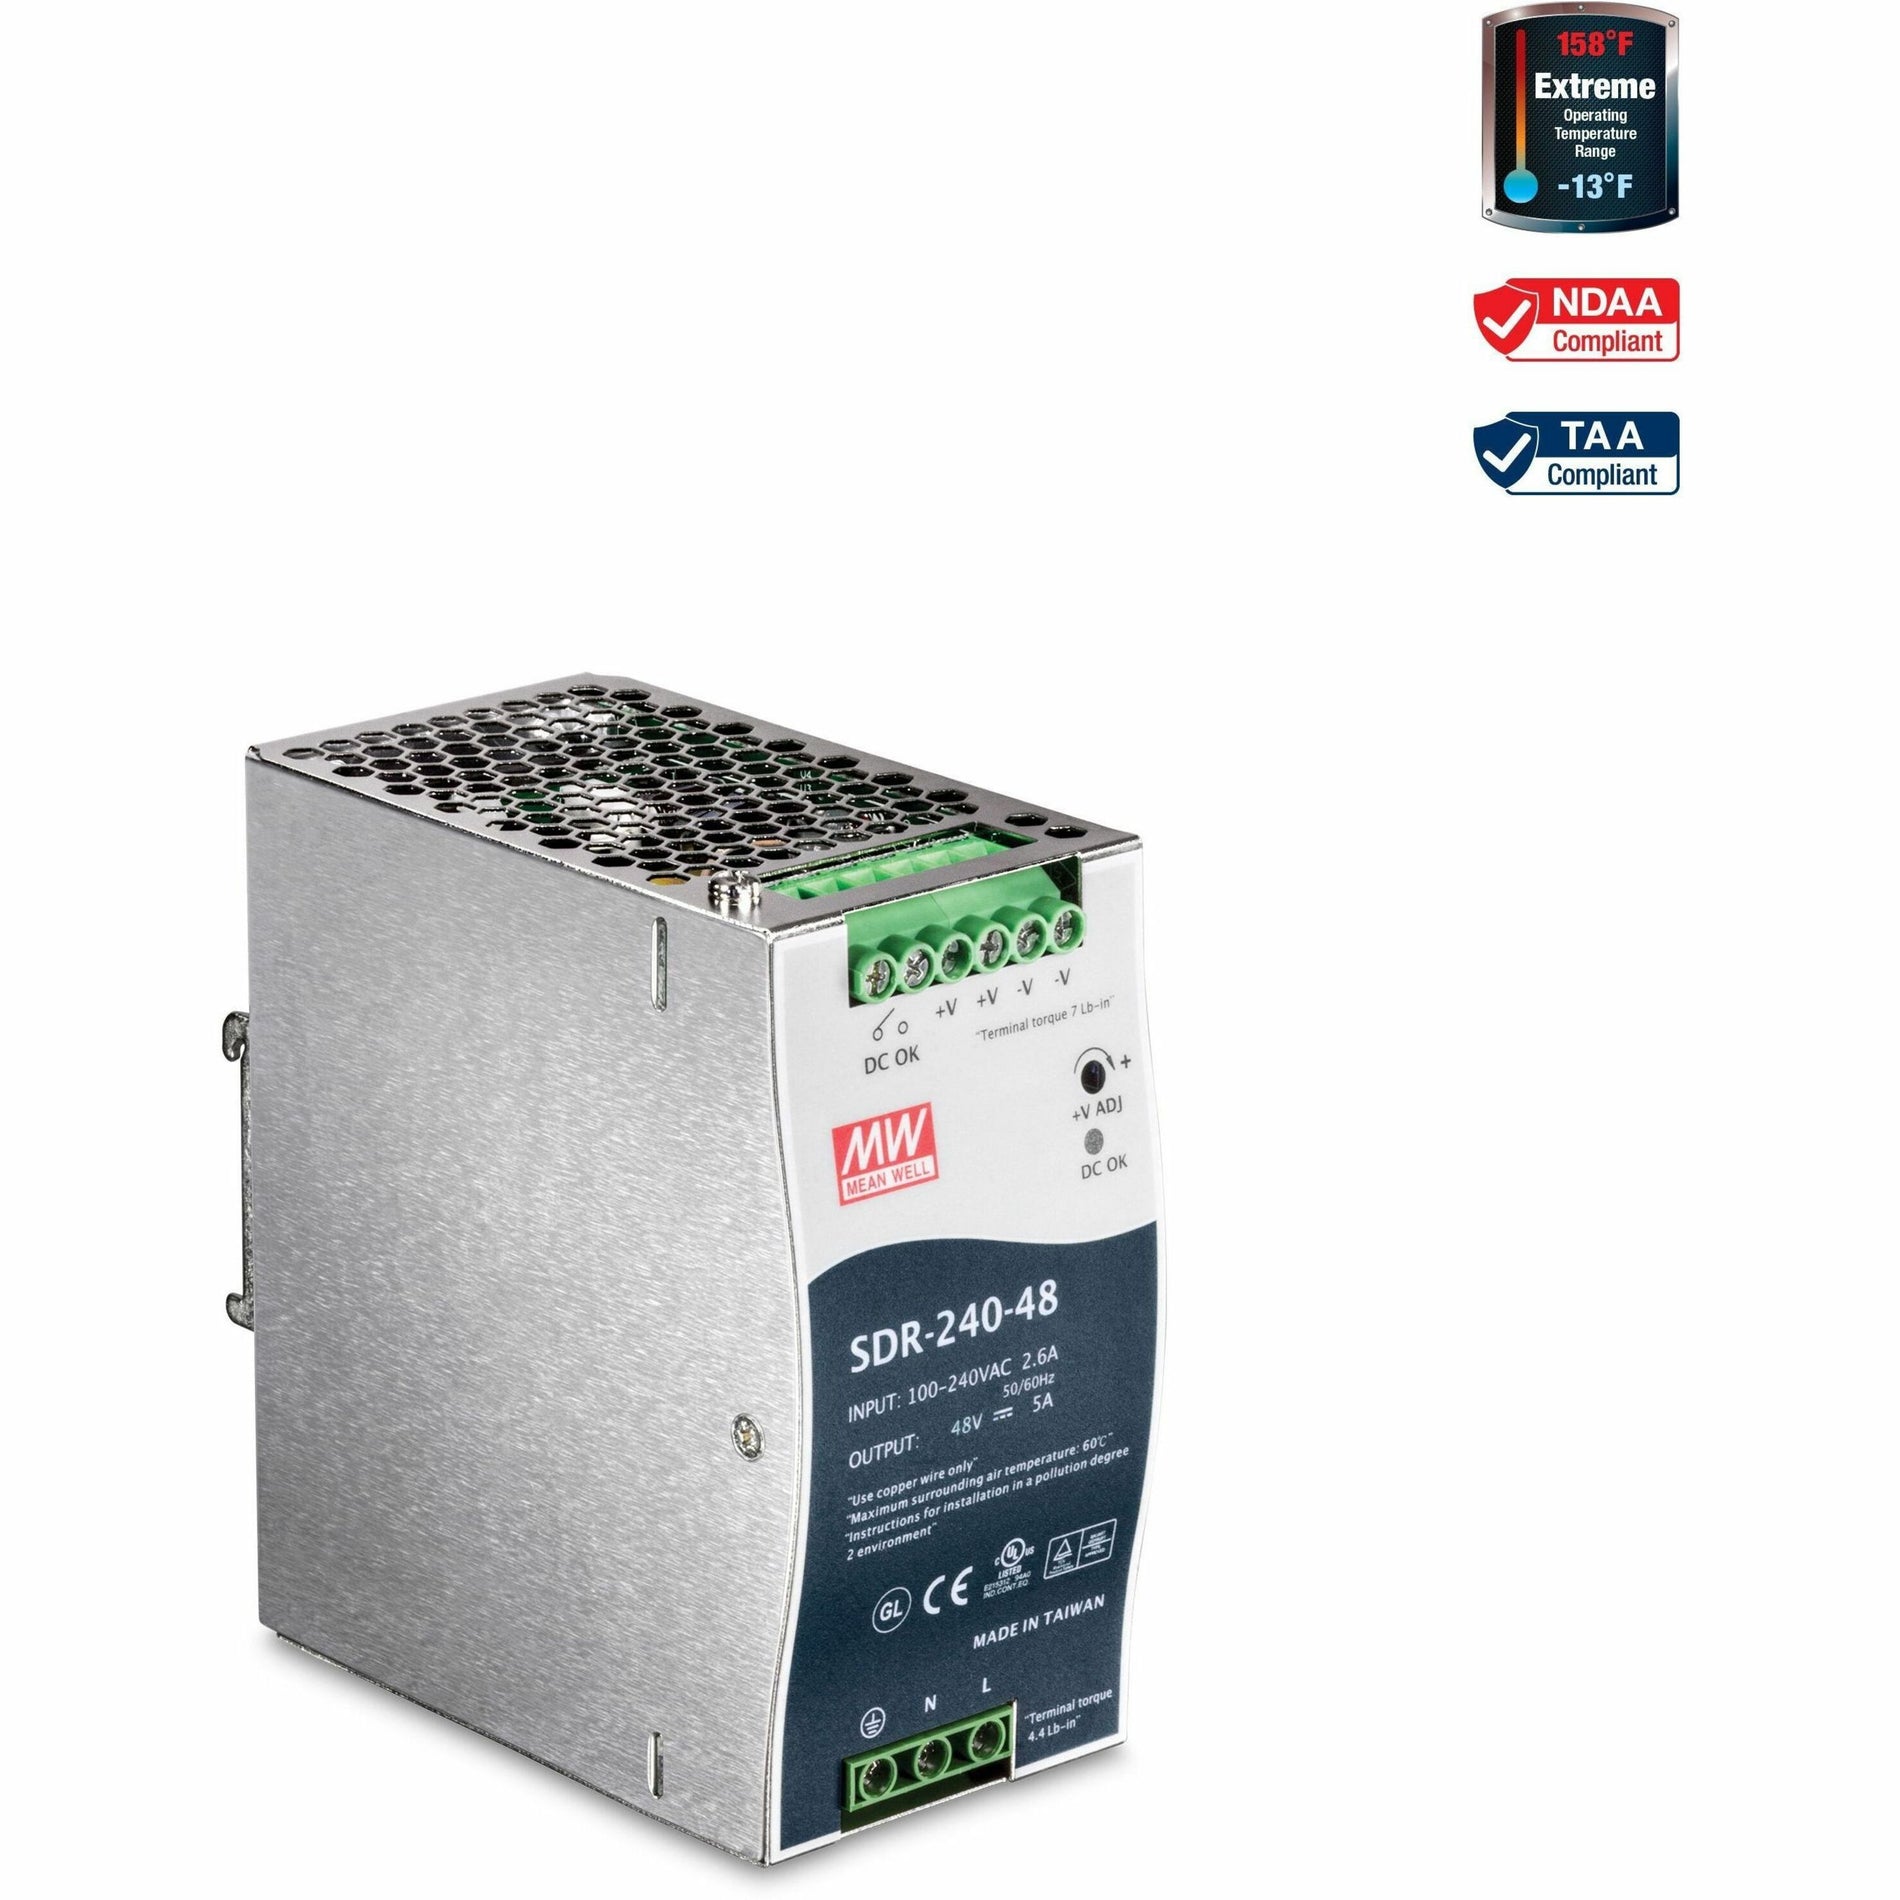 TRENDnet TI-S24048 DIN Rail 48V 240W Power Supply for TI-PG80, Extreme Operating Temp Range -25 to 70 °C, Built-in Active PFC, Passive Cooling, Silver